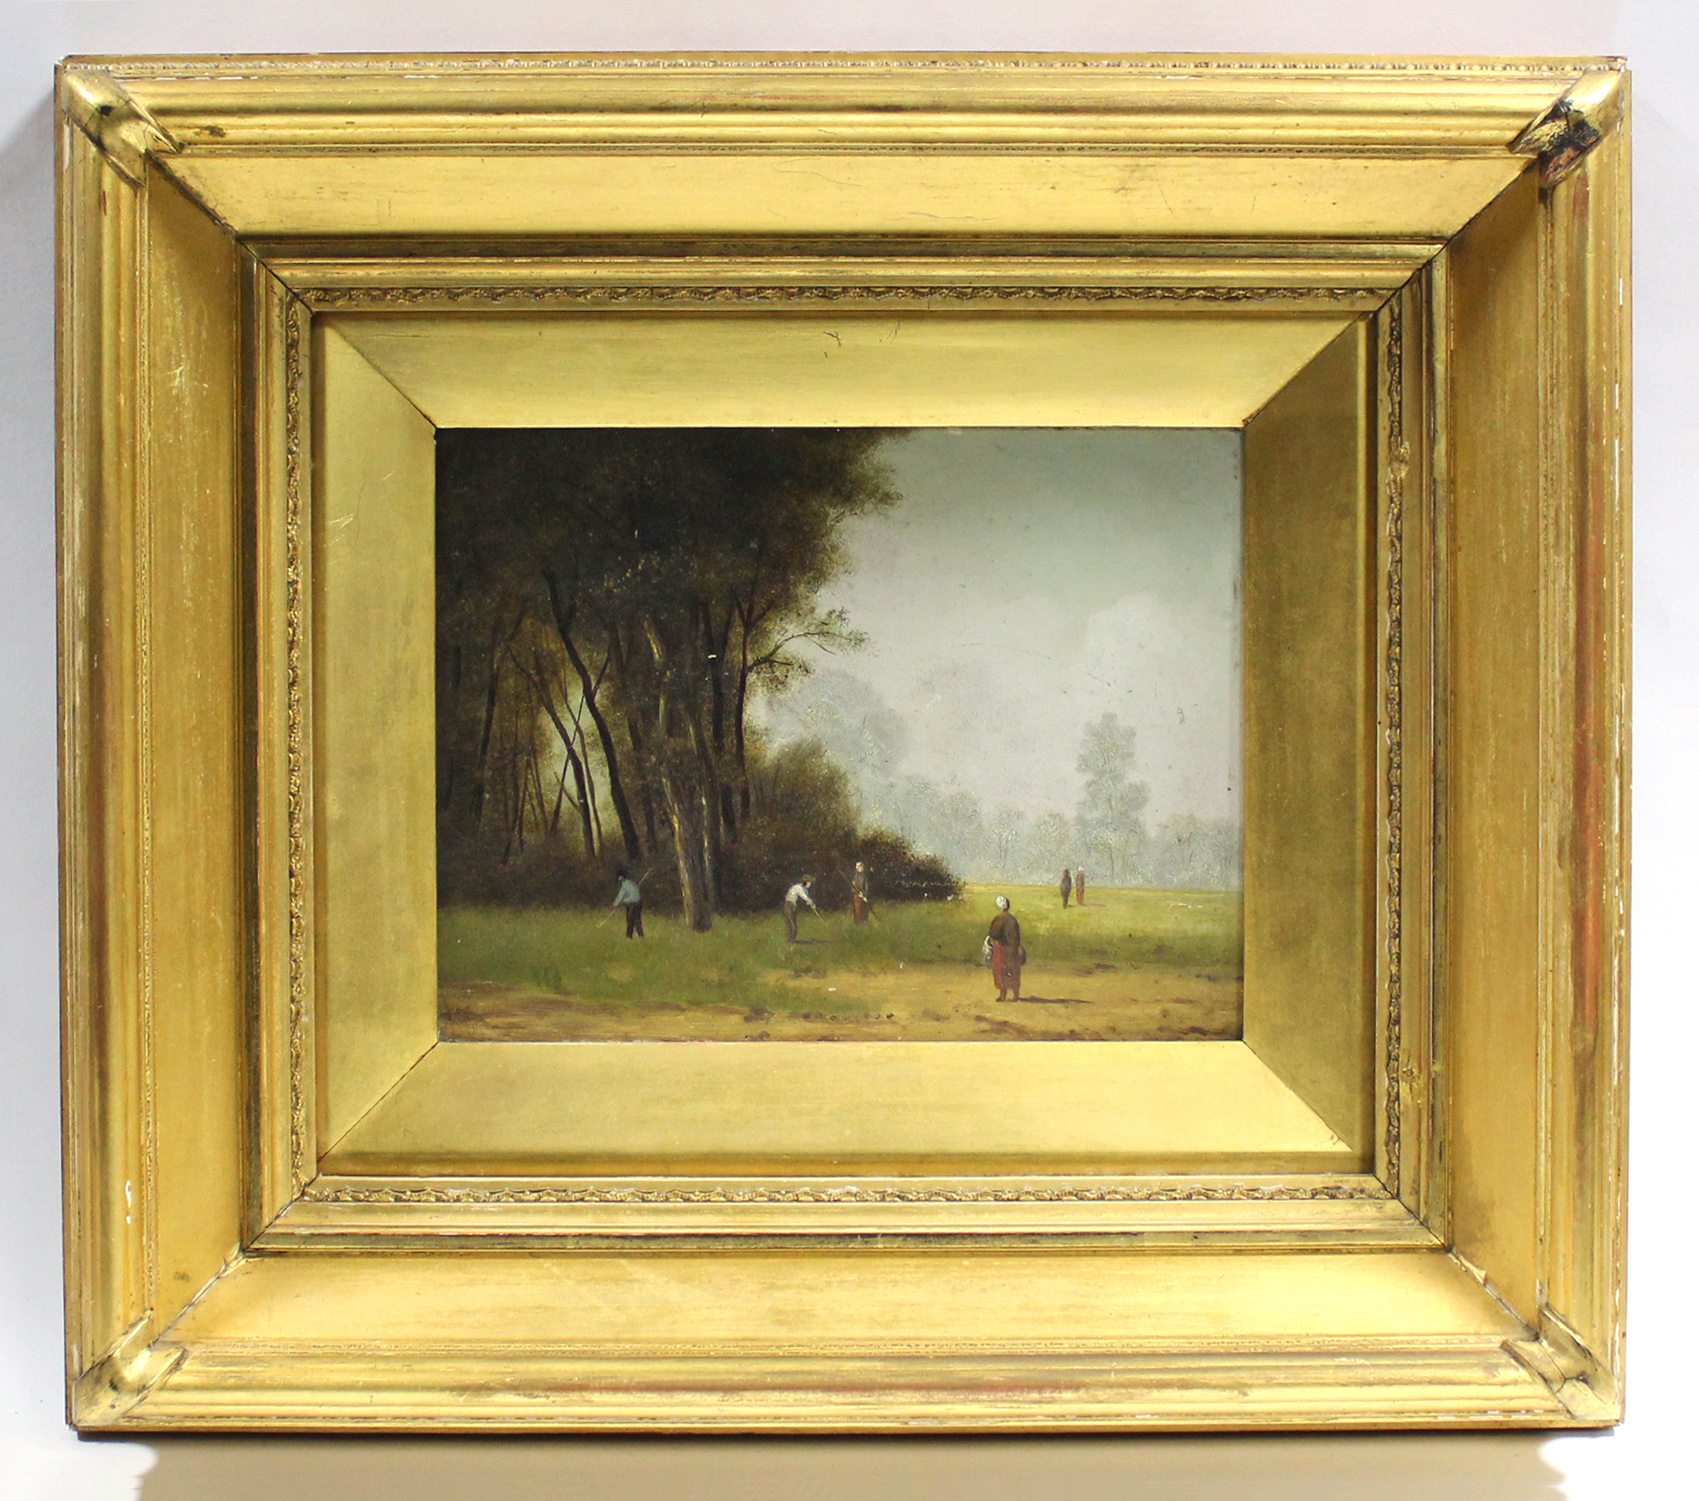 COROT, Jean-Baptiste-Camille (1796-1875) style of. Farm workers in a field with woodland to the - Image 2 of 3